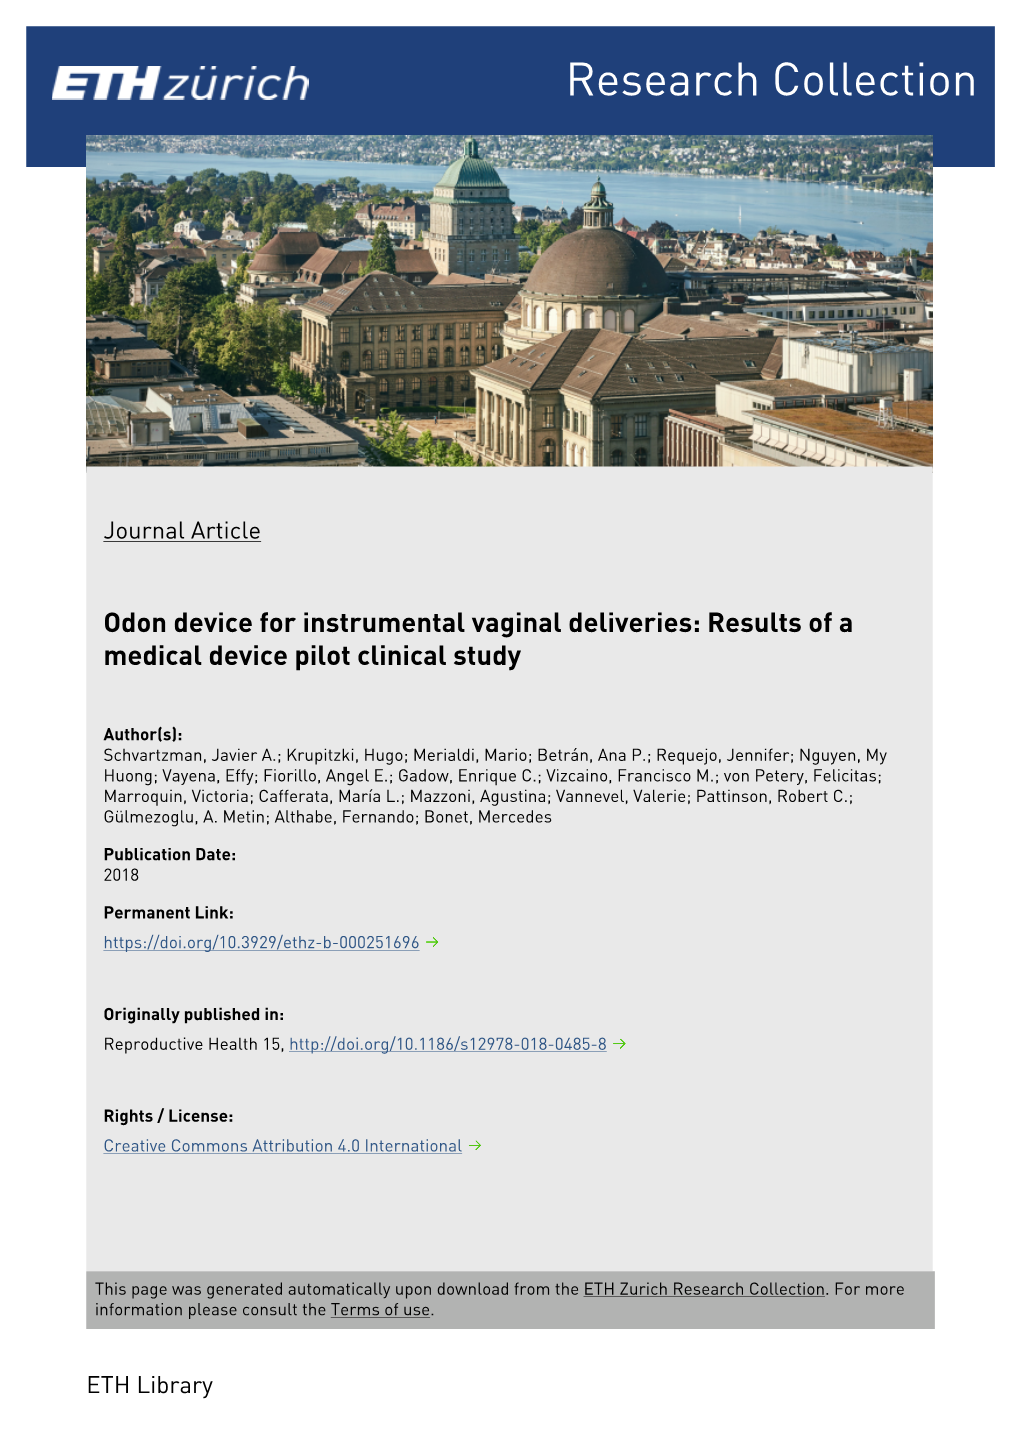 Odon Device for Instrumental Vaginal Deliveries: Results of a Medical Device Pilot Clinical Study